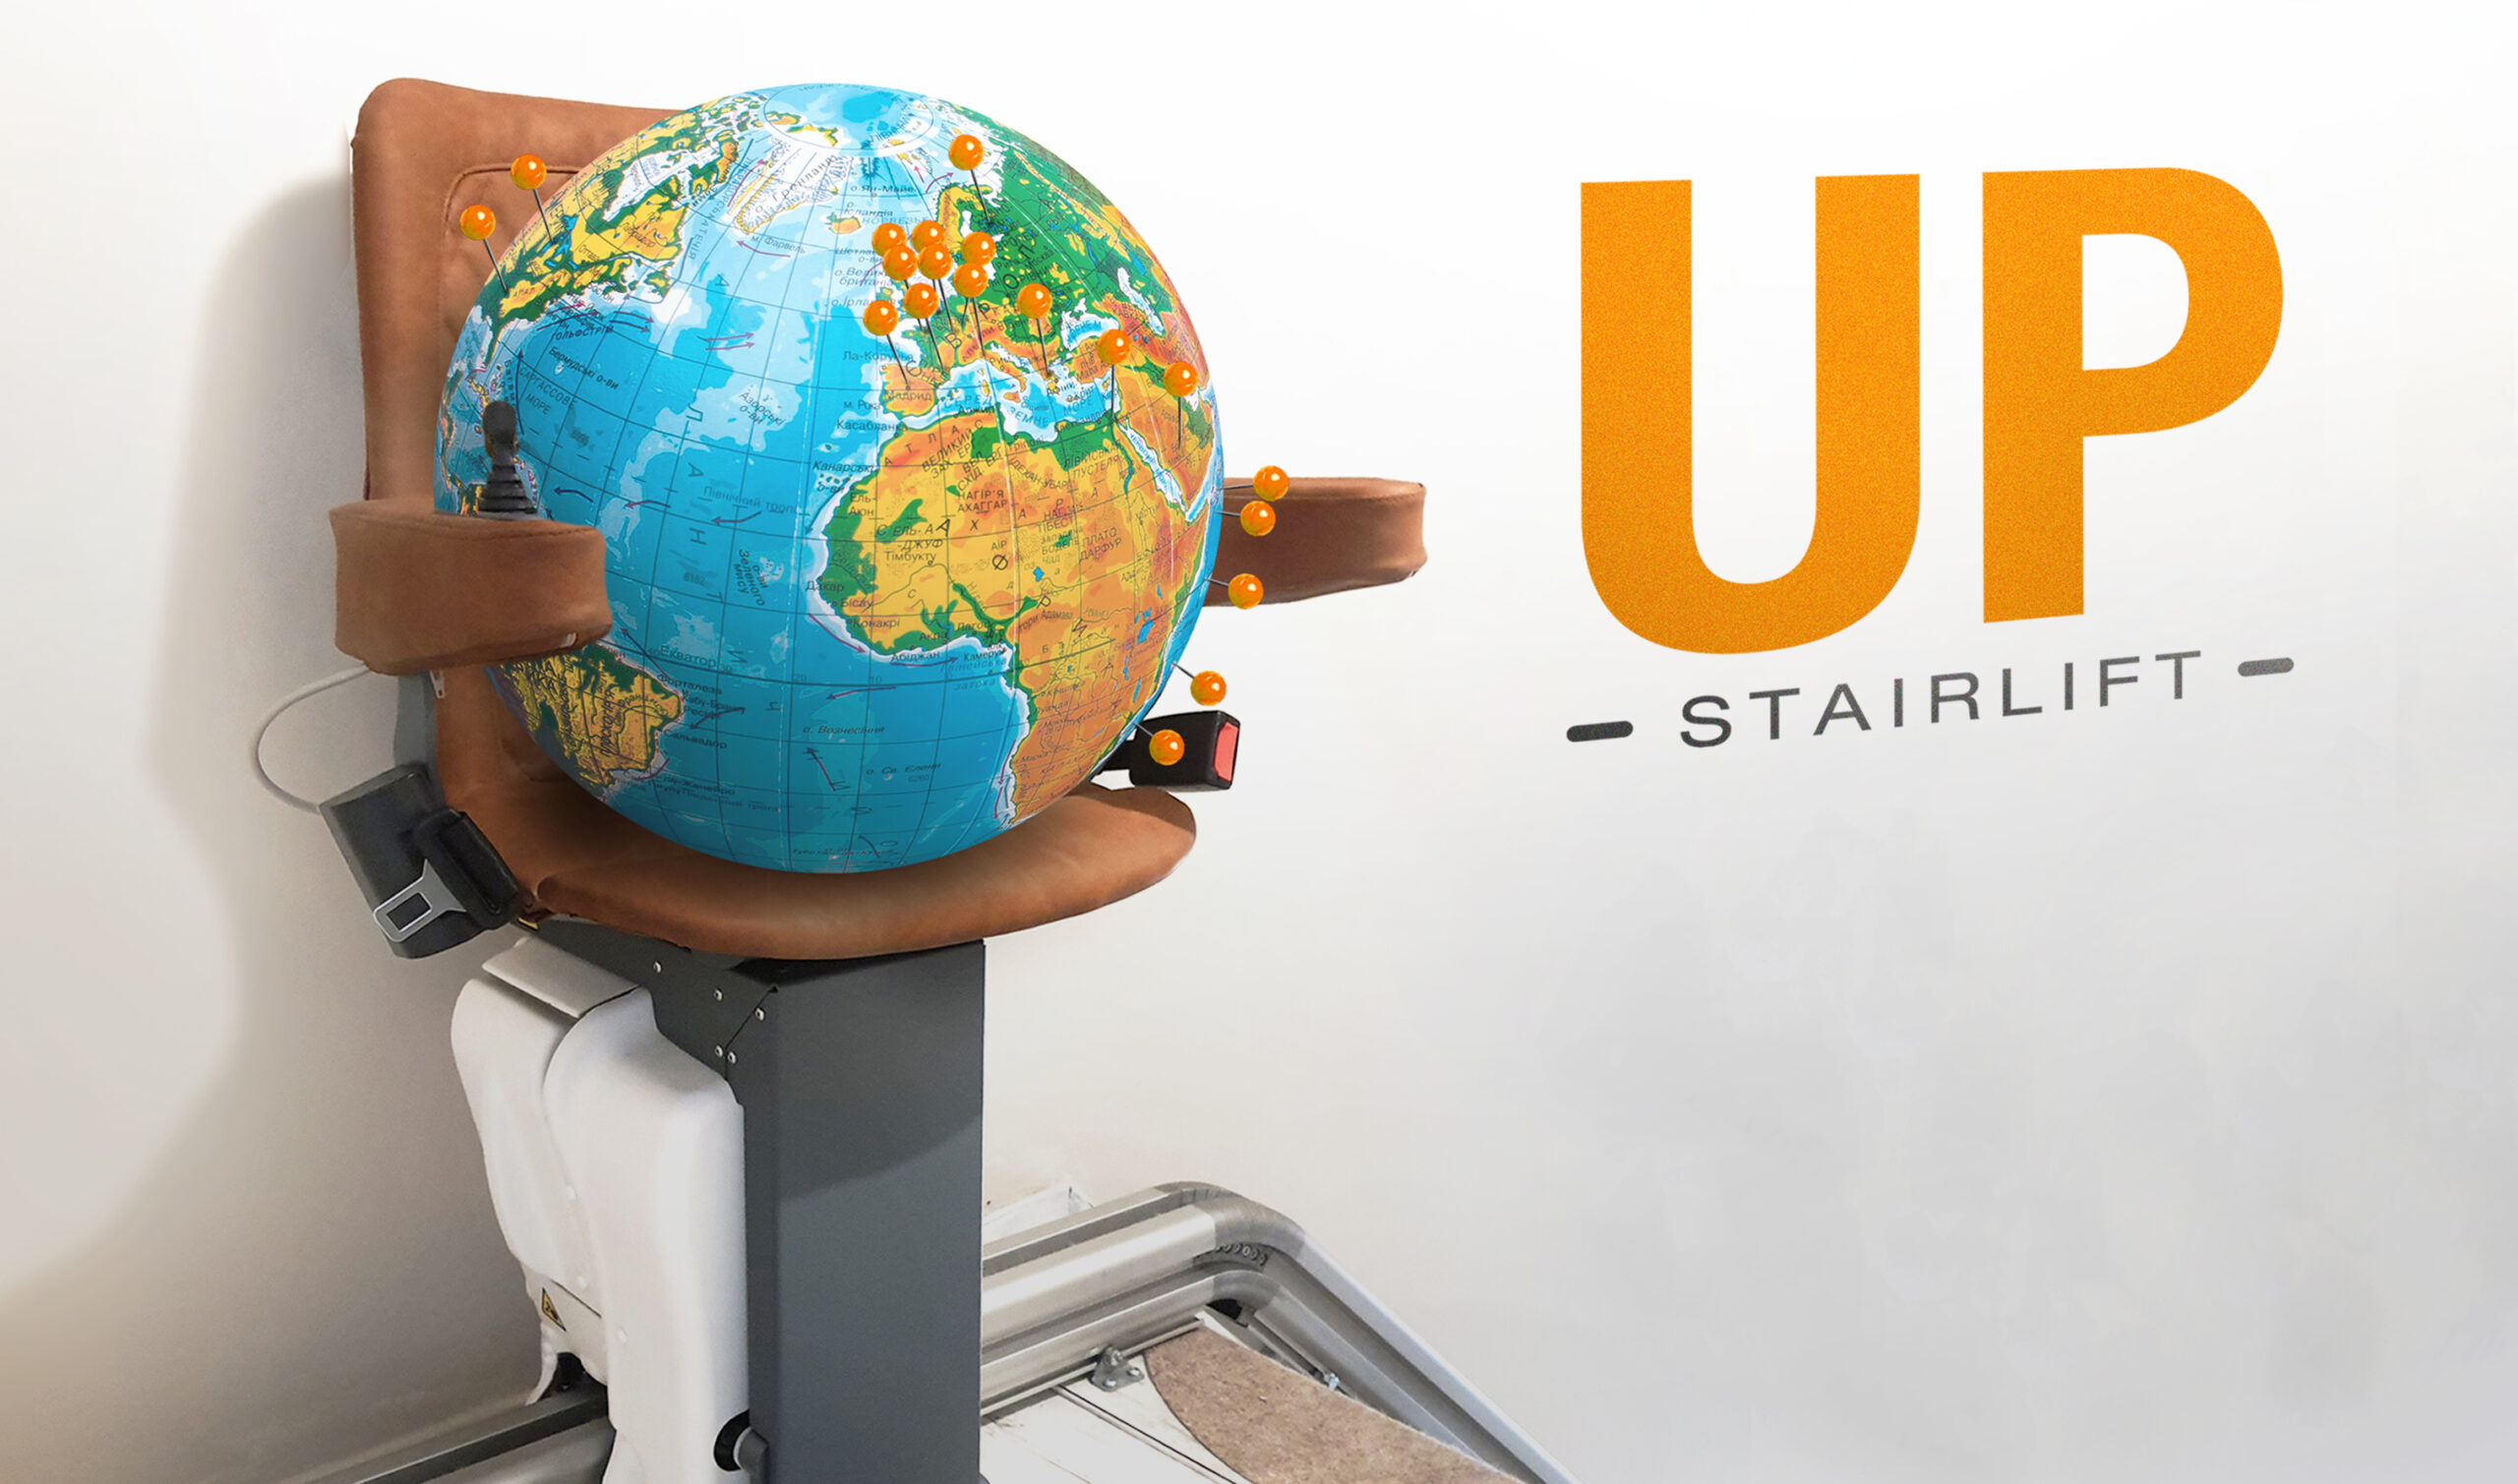 UP_Stairlift-globe